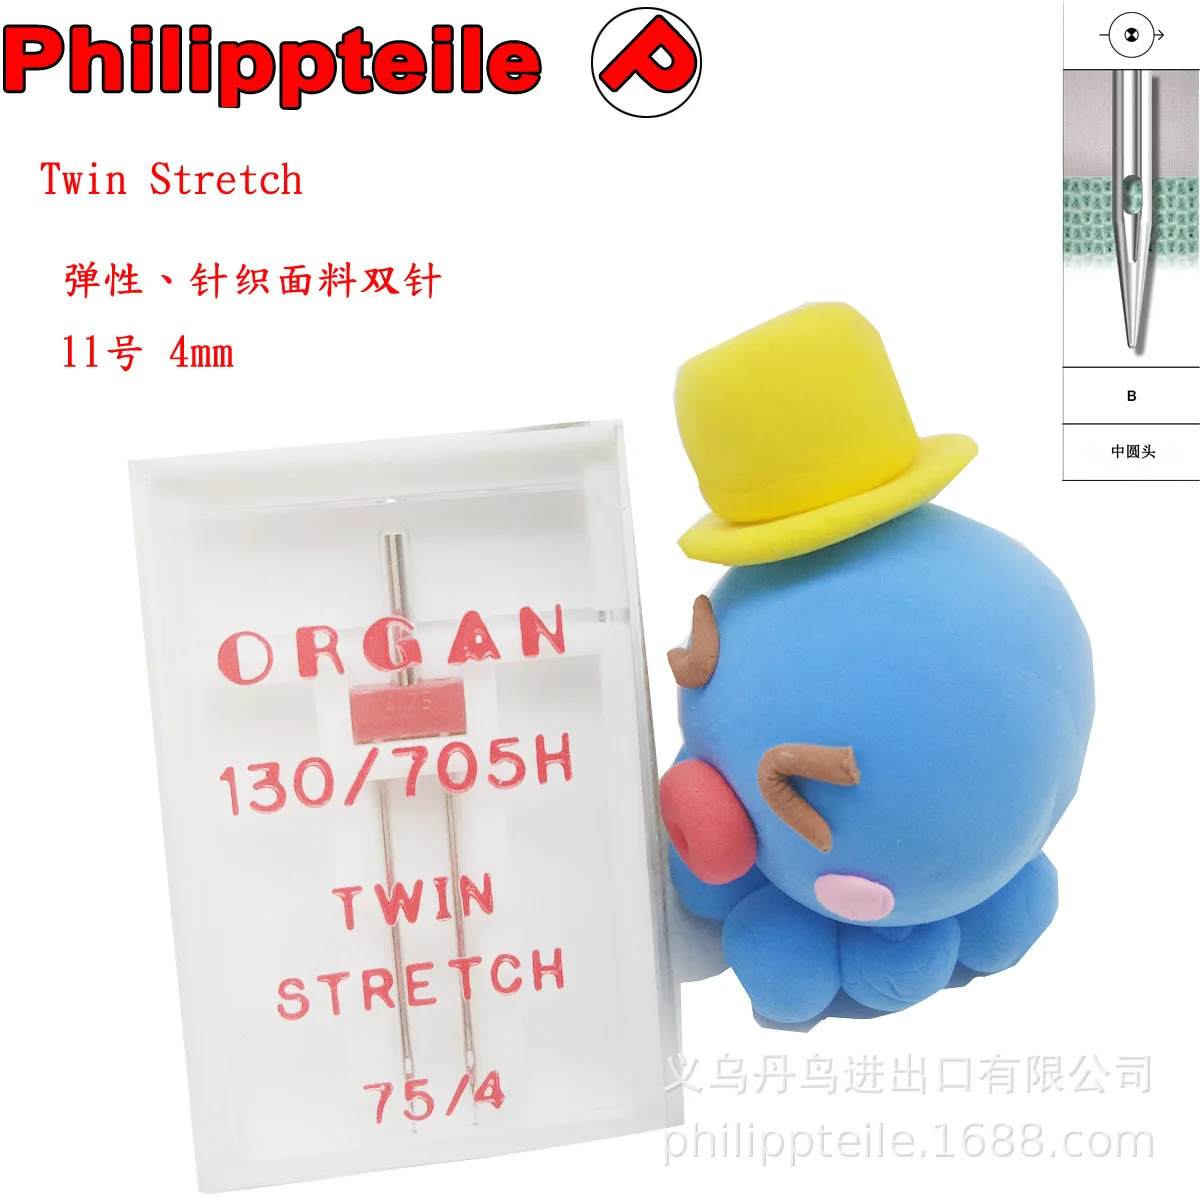 

Top Quality Machine Needles Organ 130/705H Twin stretch Needles Jumper Needle Knitting Elastic Fabric Special Double Needle